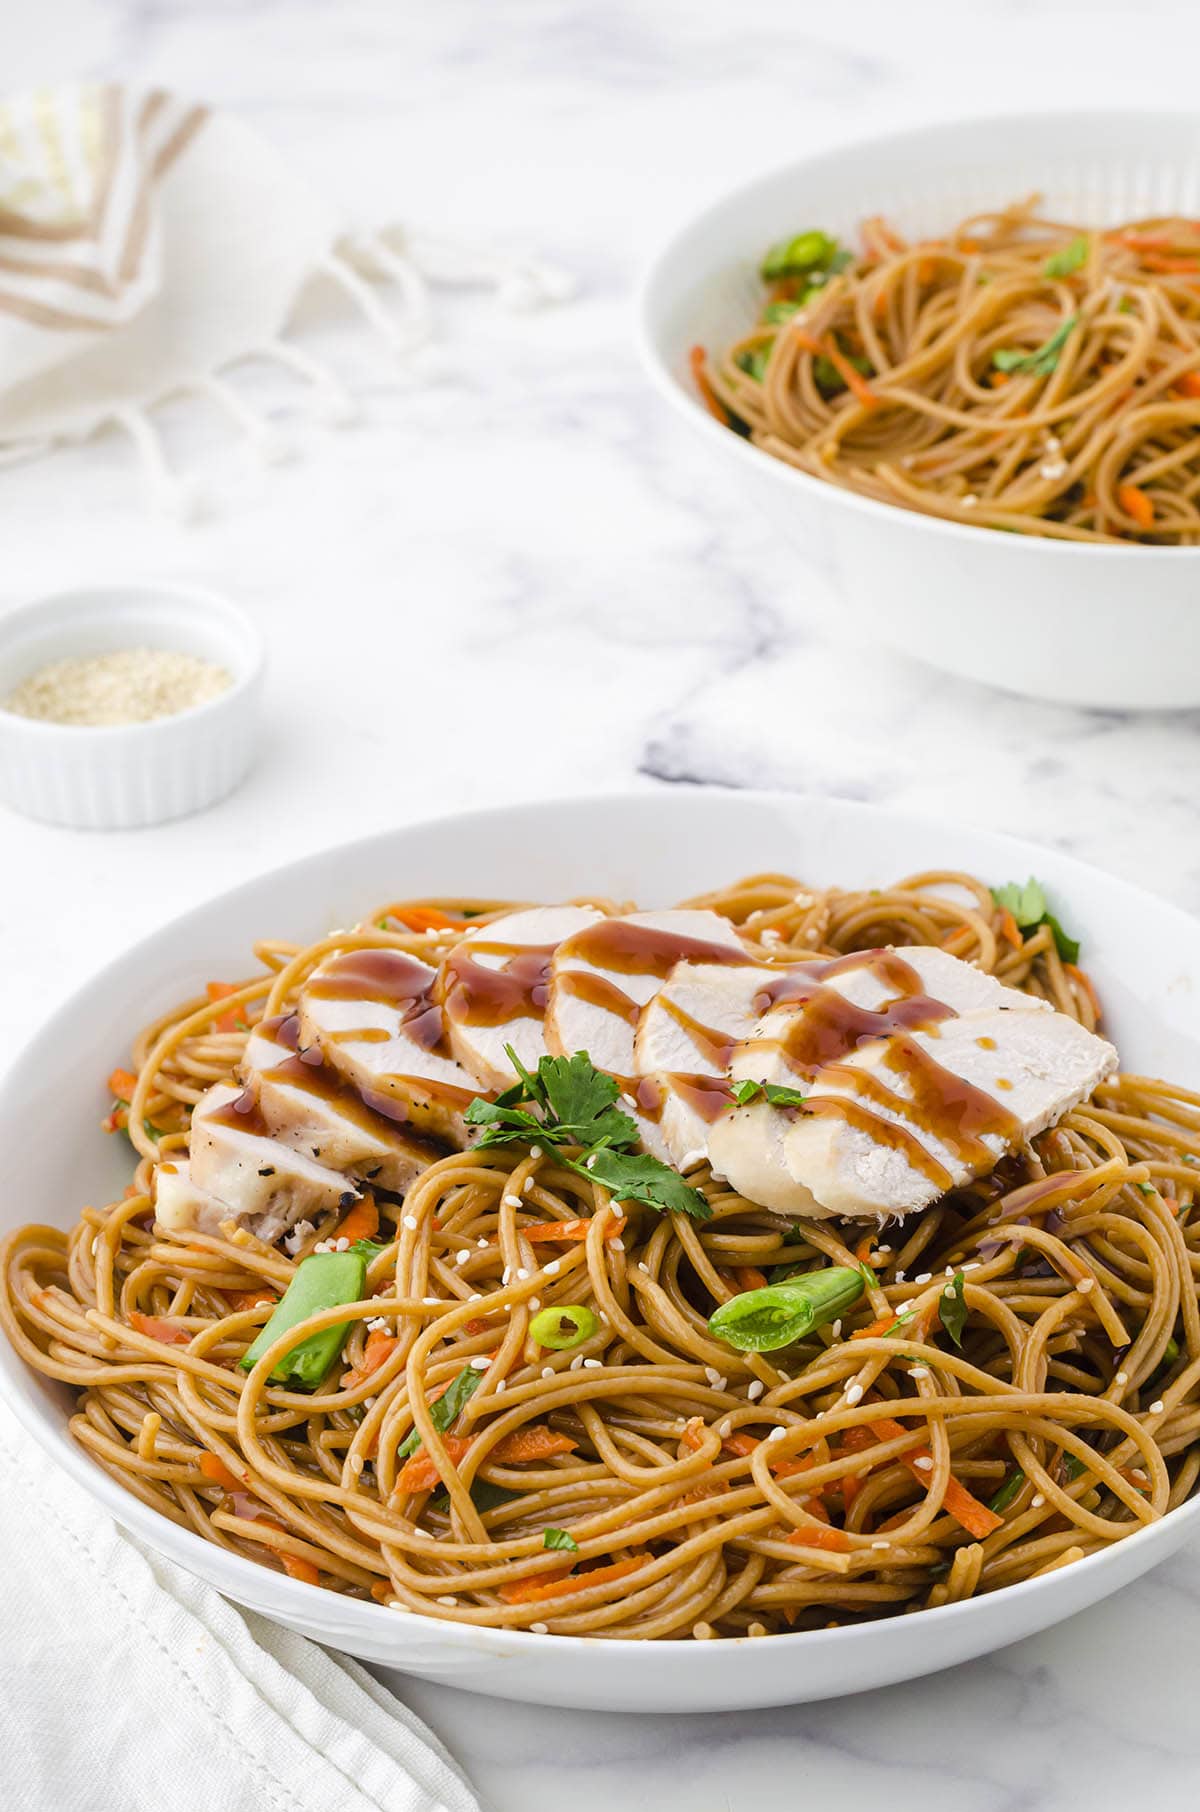 Udon noodles in bowl topped with sliced chicken drizzled with teriyaki sauce.